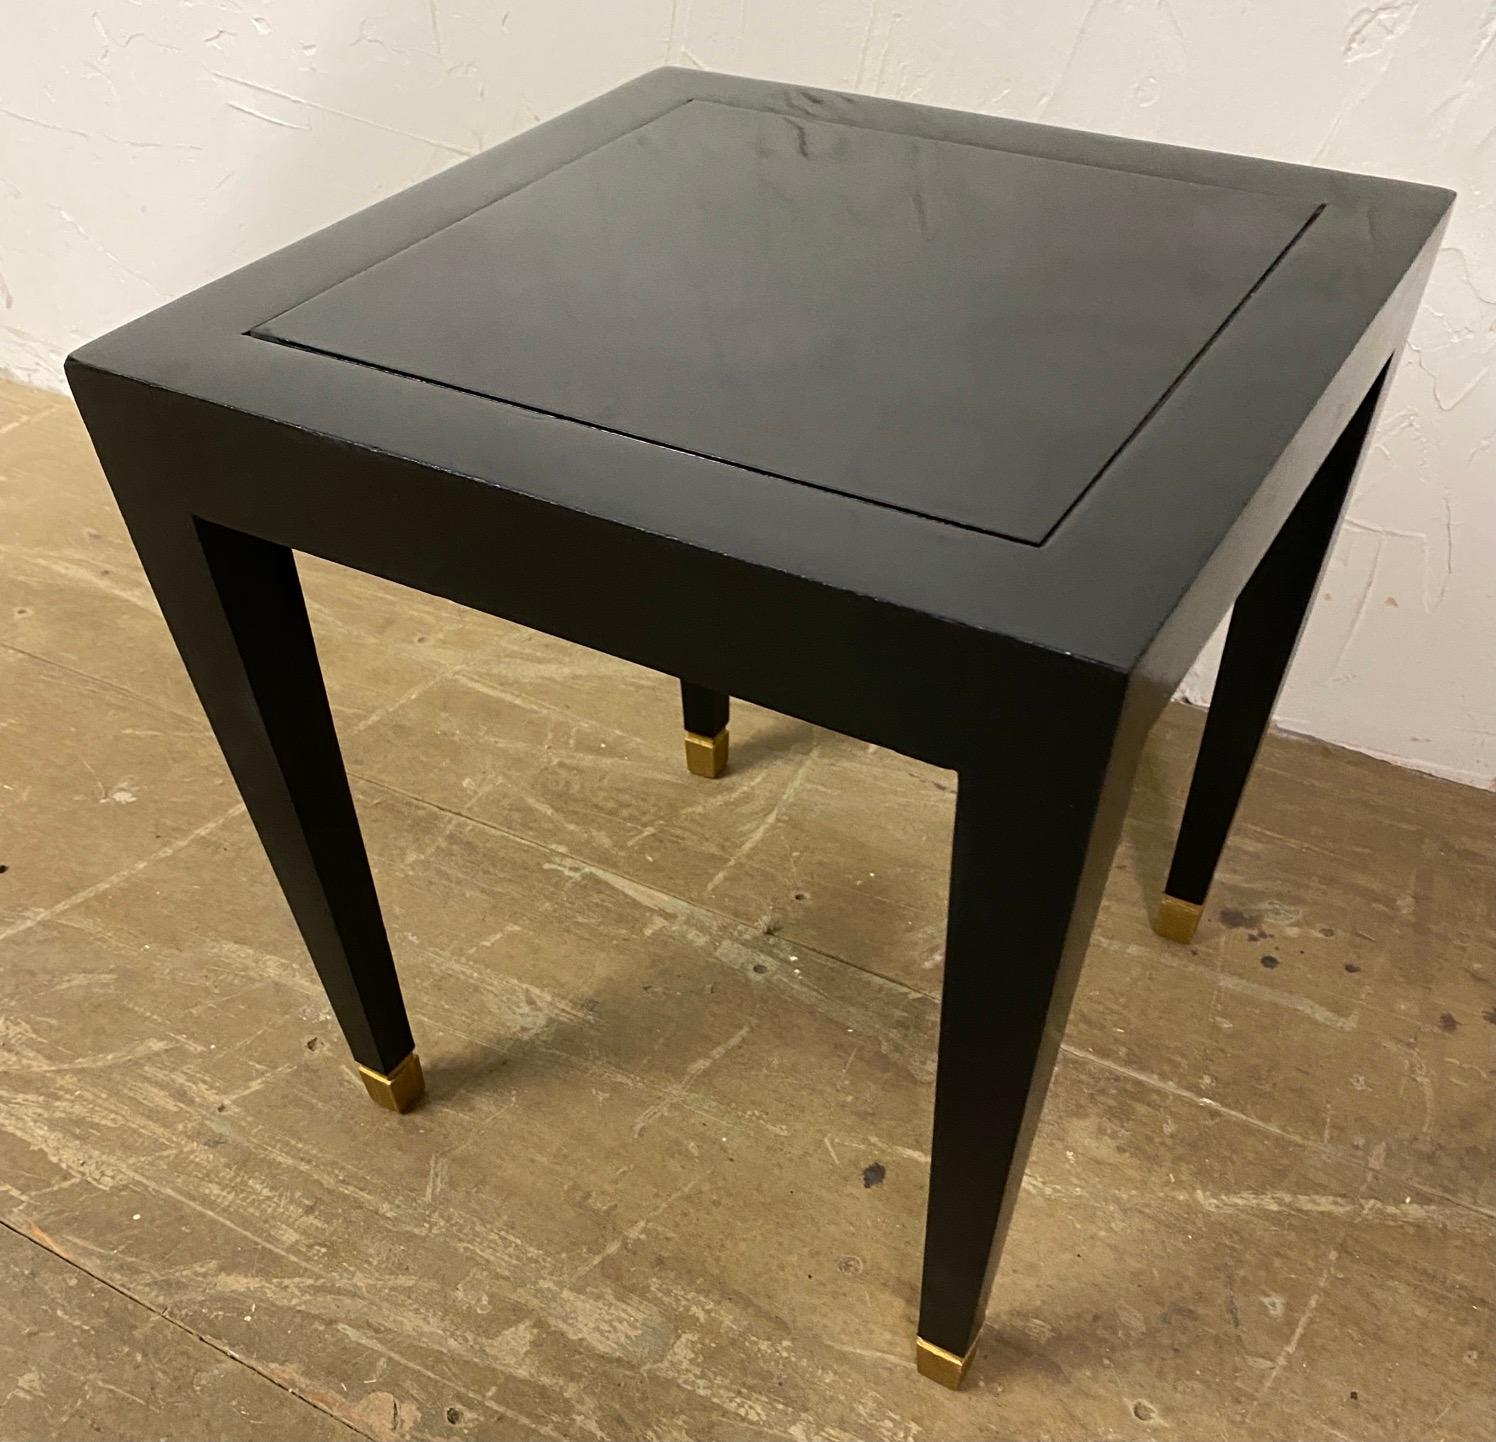 Stylish small black lacquered Donghia Mardrid side table with tapered legs and square brass caps. Great small table to set beside a chair or sofa to set a drink down on. The table can be moved easily to suit many needs. A second shorter matching 16